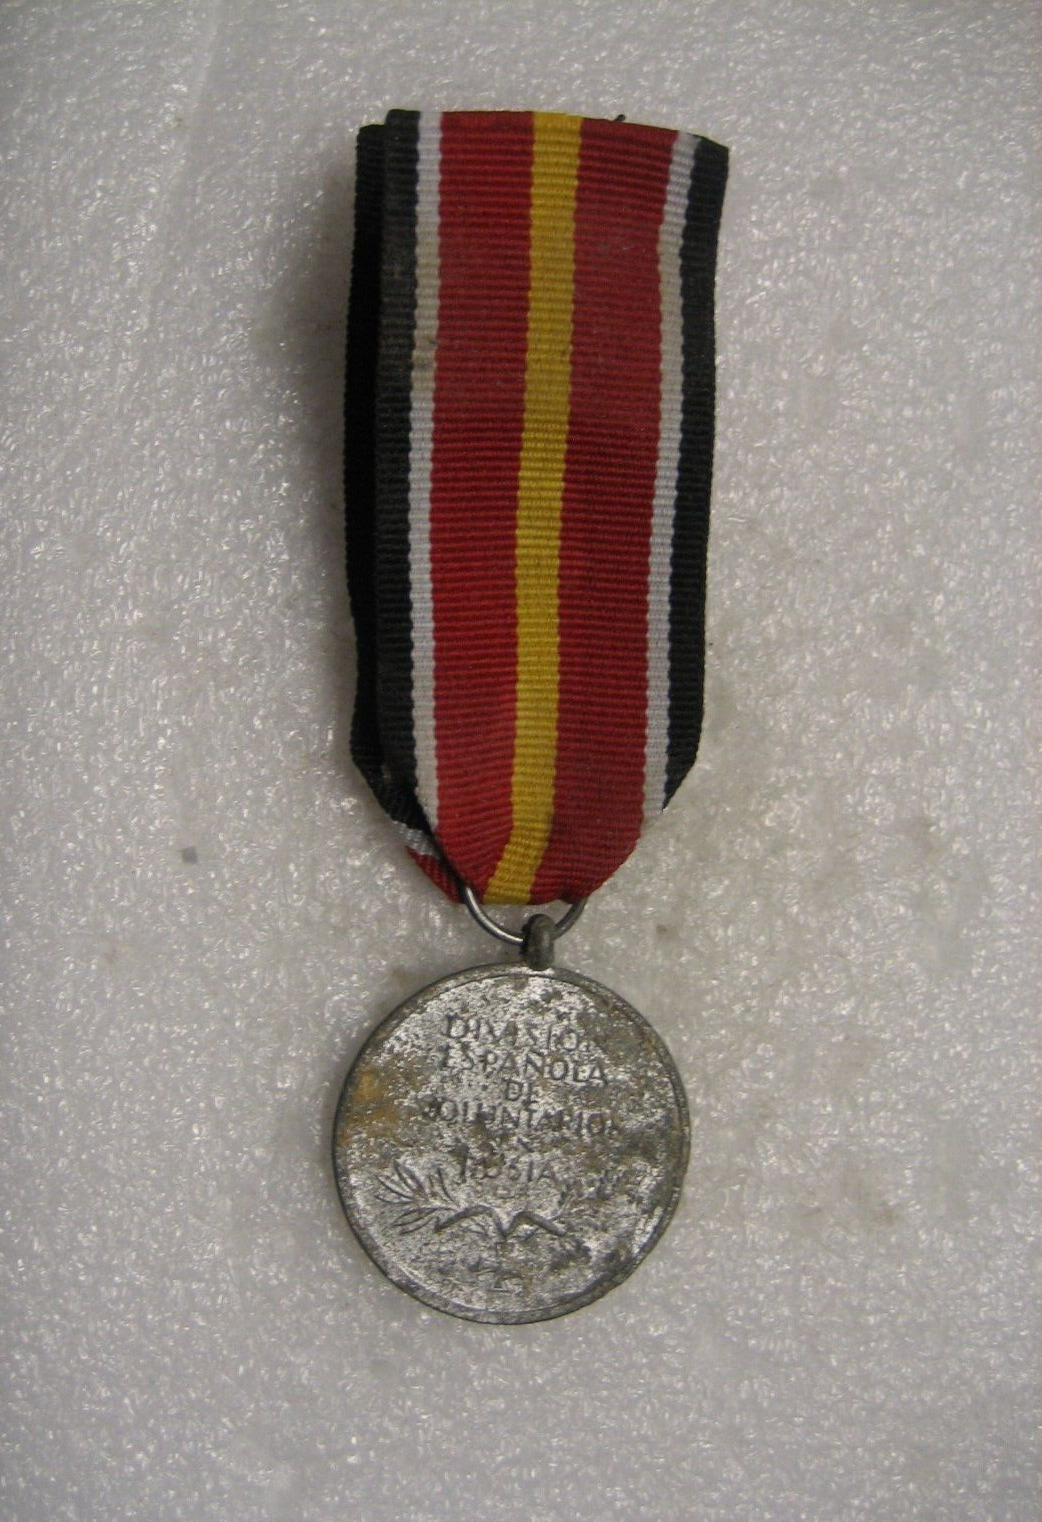 Spain Spanish Troops ww2 medal Spanish edition 1960s